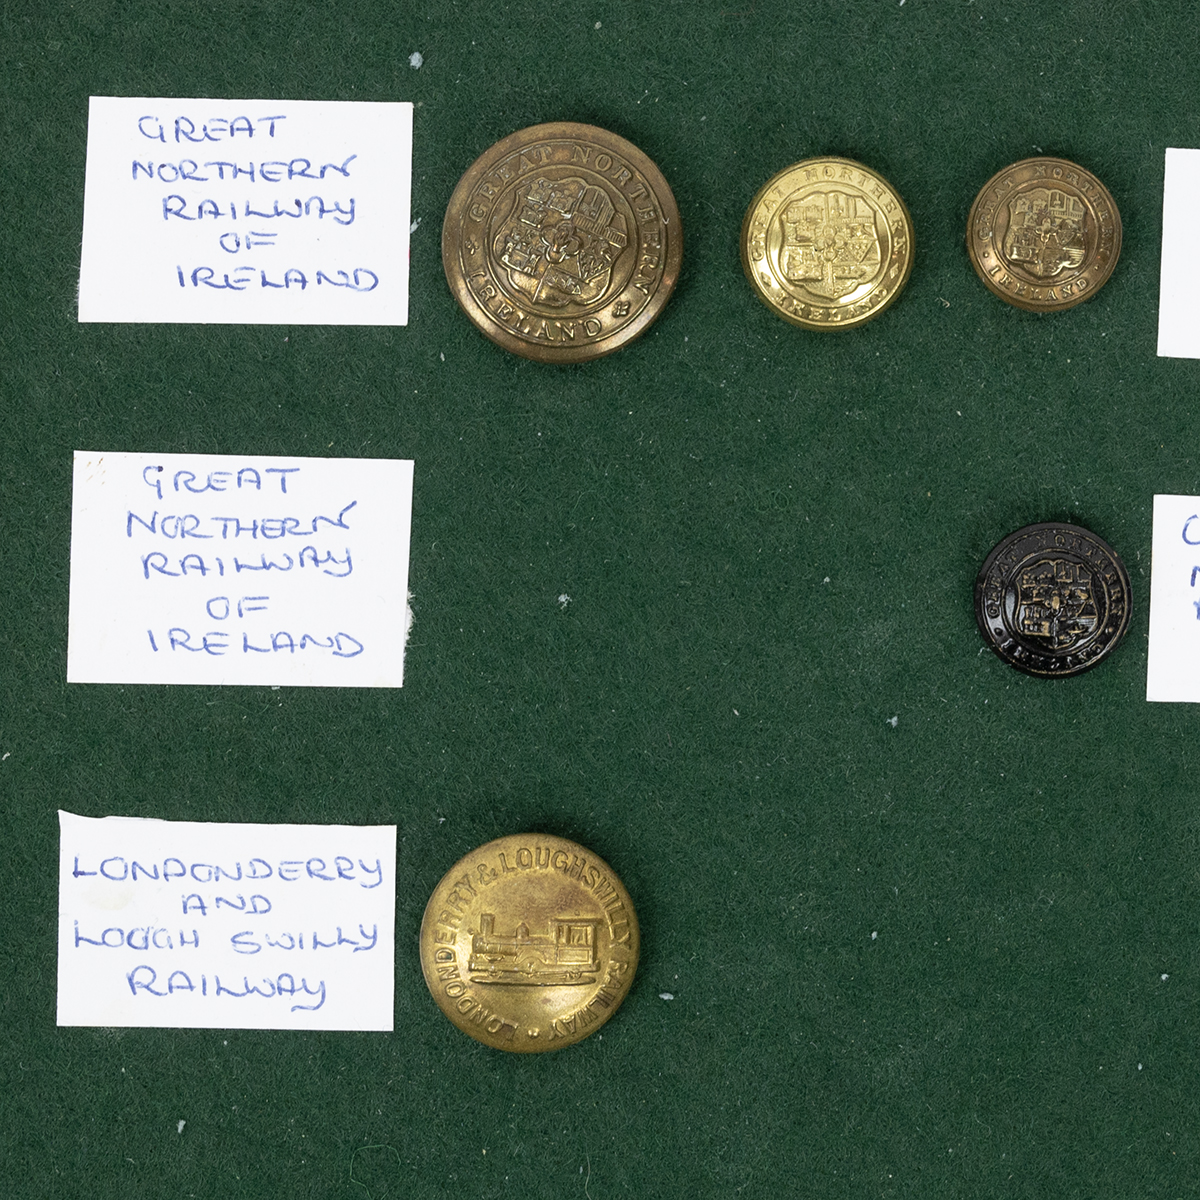 Quantity of Irish railway buttons and badges. Great Northern Railway of Ireland, Londonderry and ... - Image 3 of 3